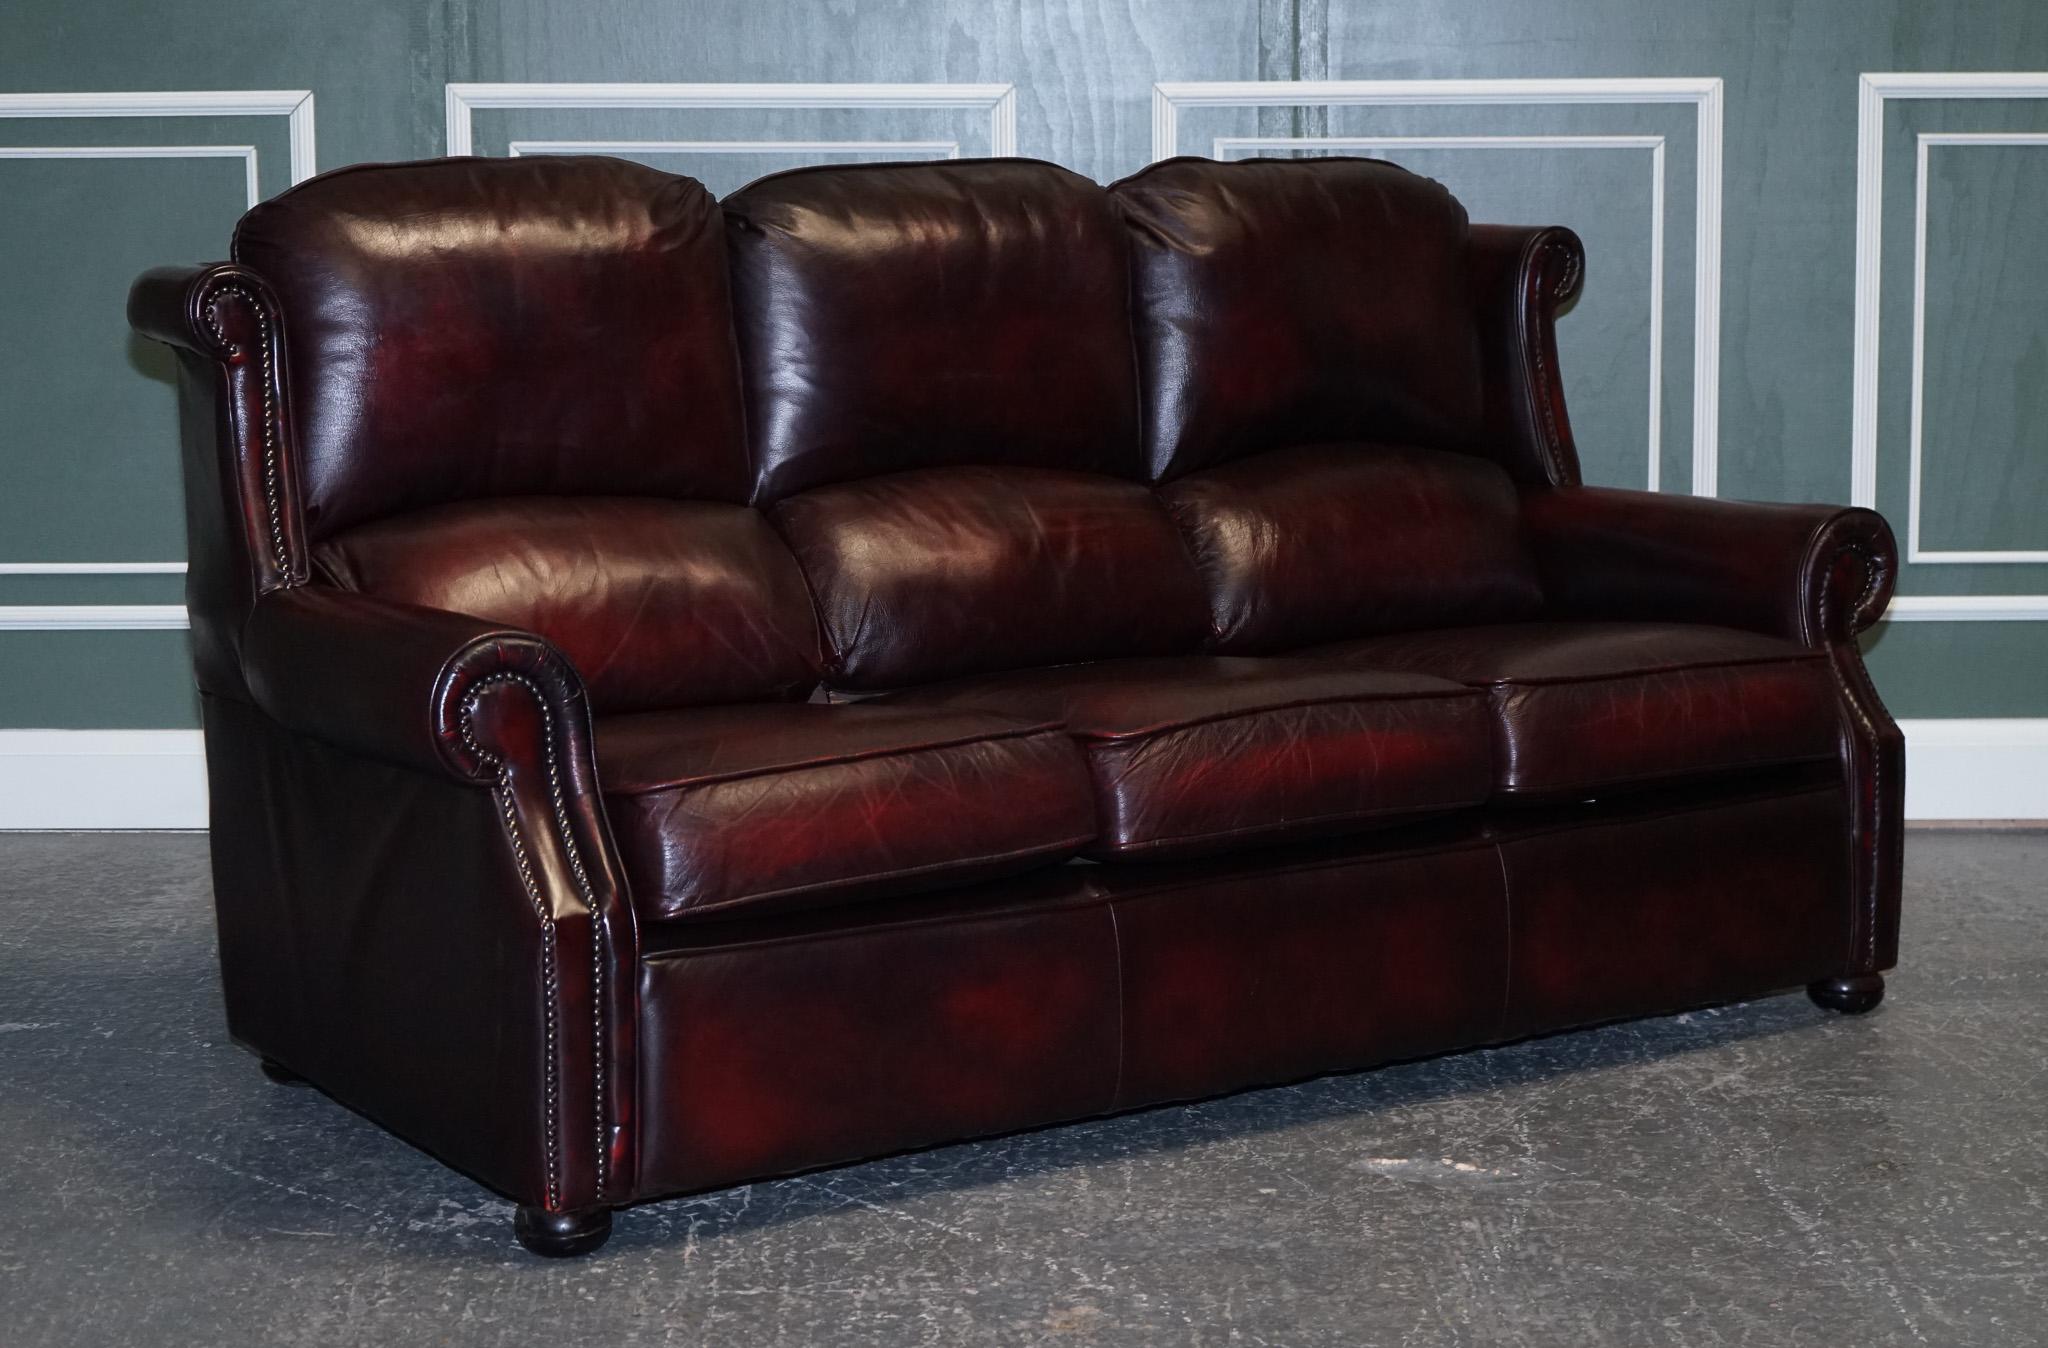 We are delighted to present this Vintage Thomas Lloyd burgundy leather 3 seater sofa.

A lovely well made solid sofa, still in very good condition.
This sofa has been made by Thomas Lloyd, a very well-known English-made company.

It is